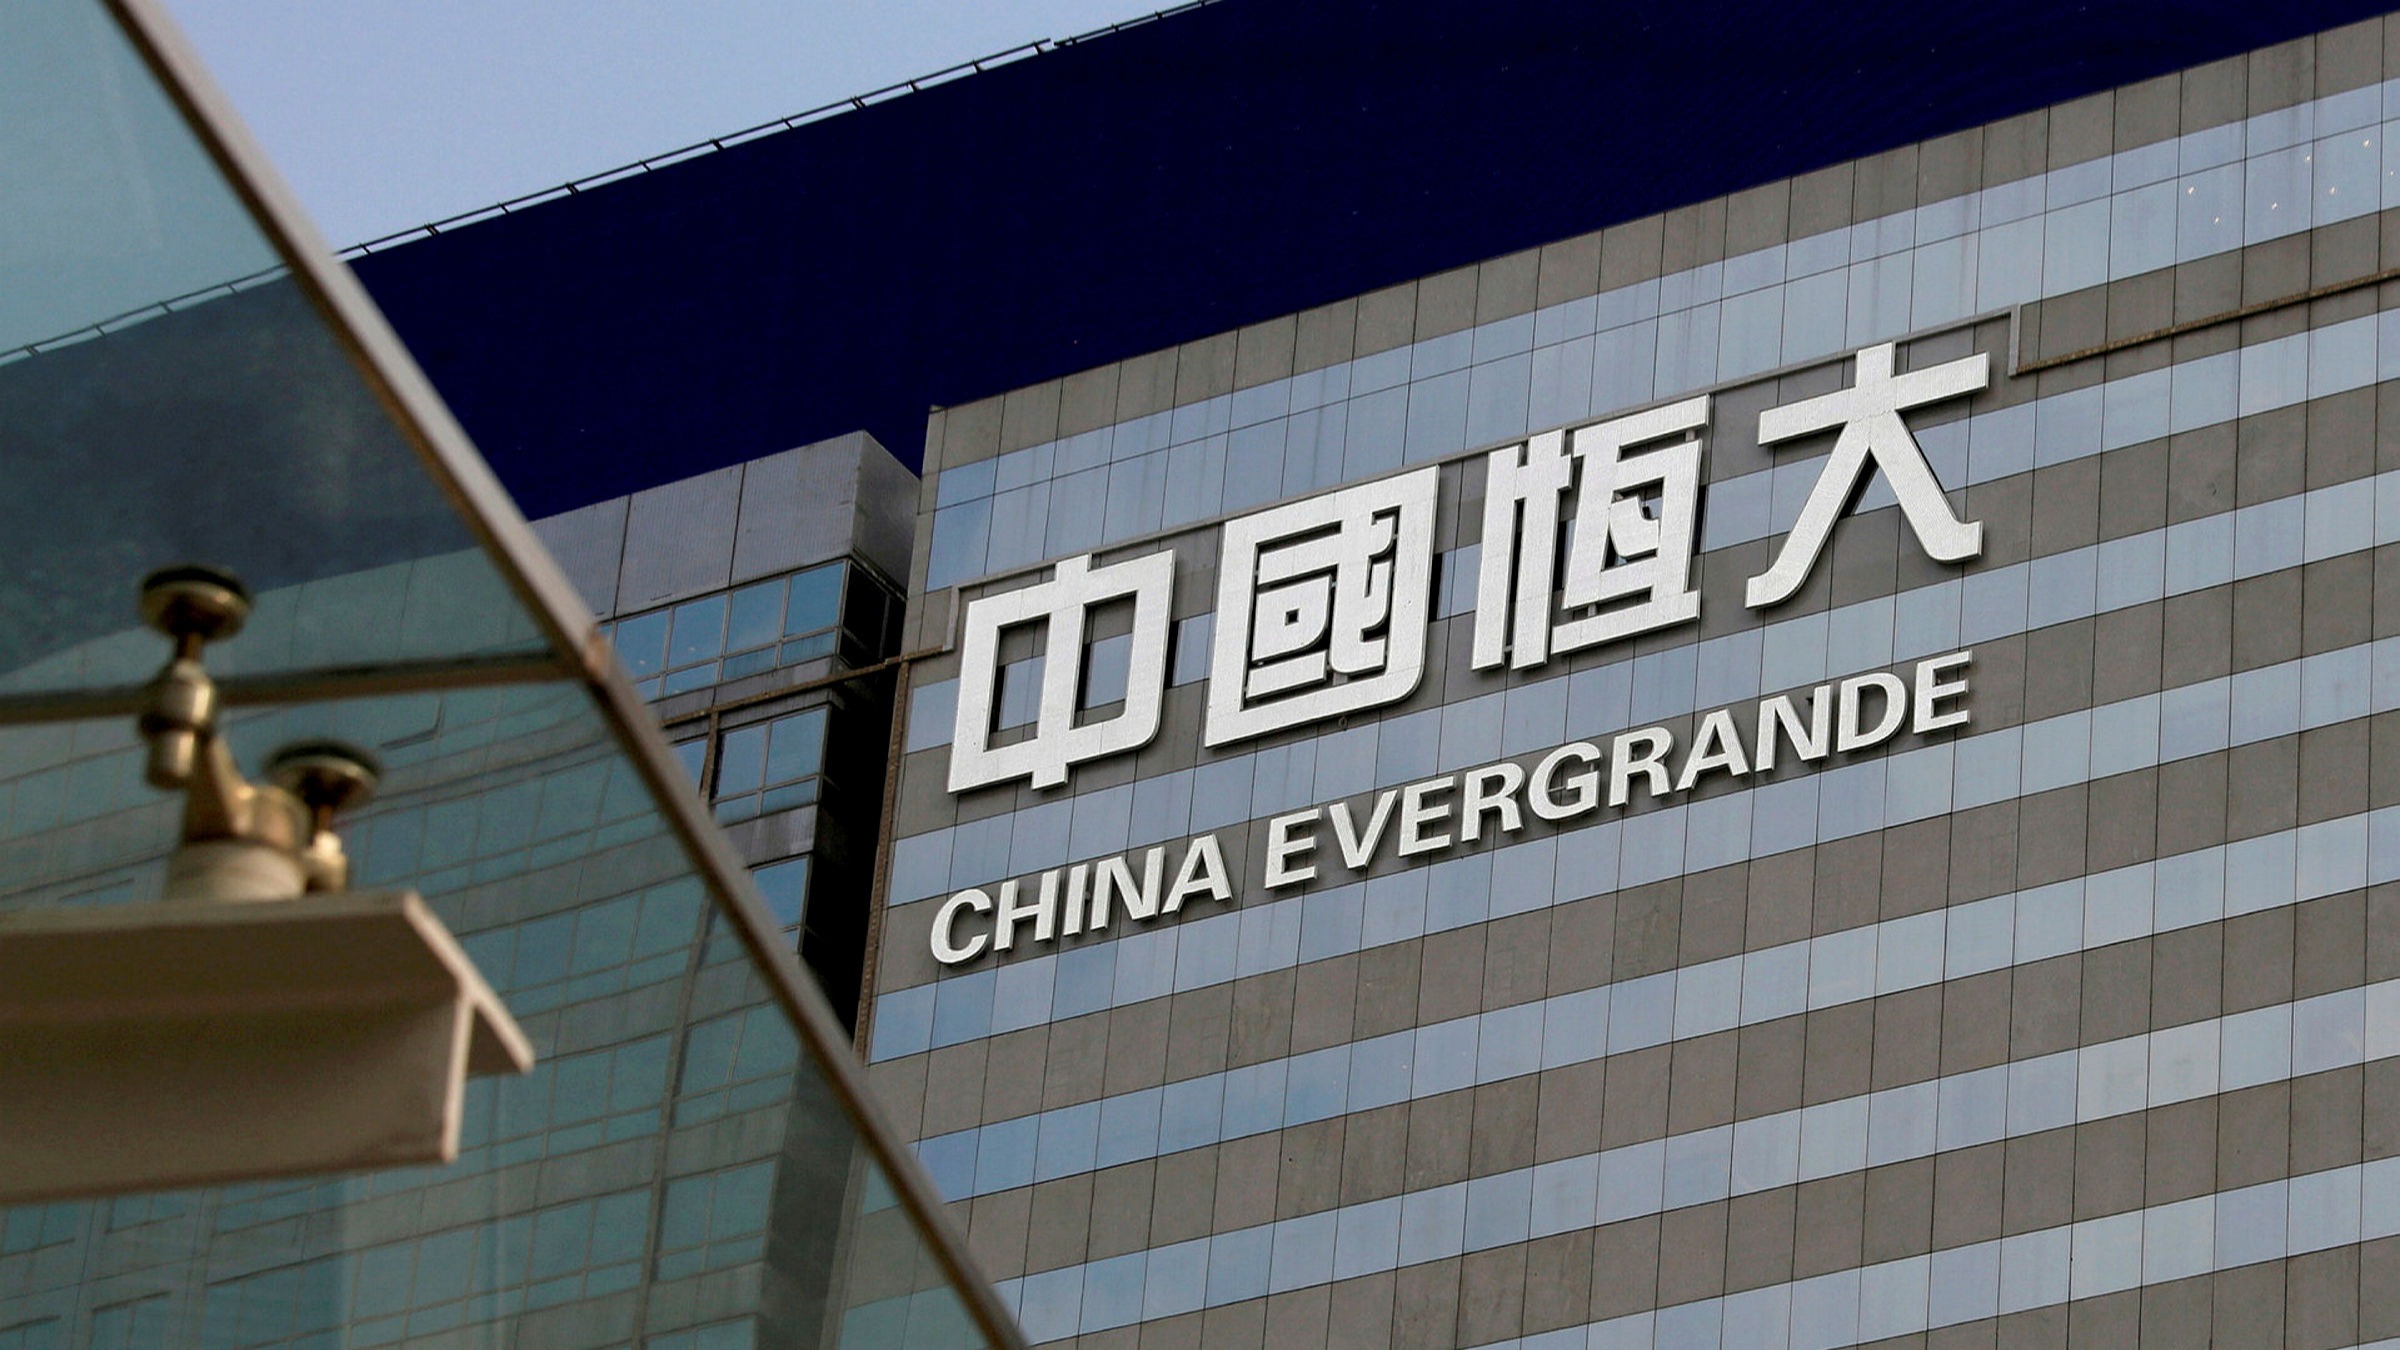 The Evergrande Building in Shenzhen, where investors gather to demand repayment of loans and financial products.